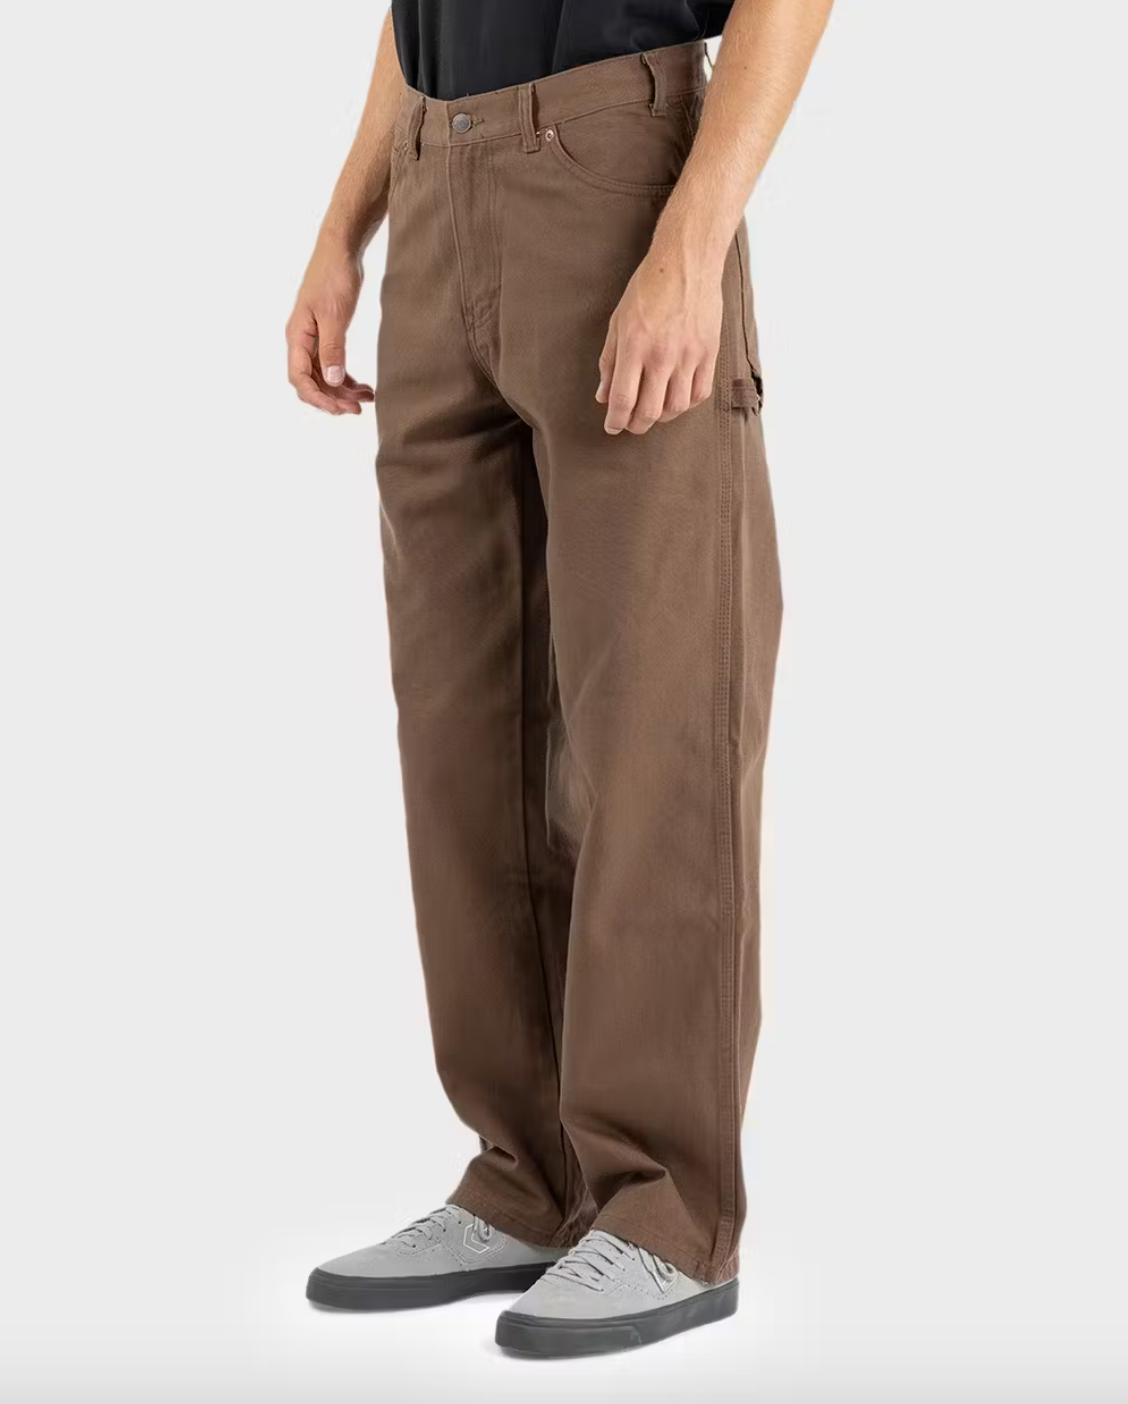 1939 Relaxed Fit Straight Leg Carpenter Pant - Rinsed Timber